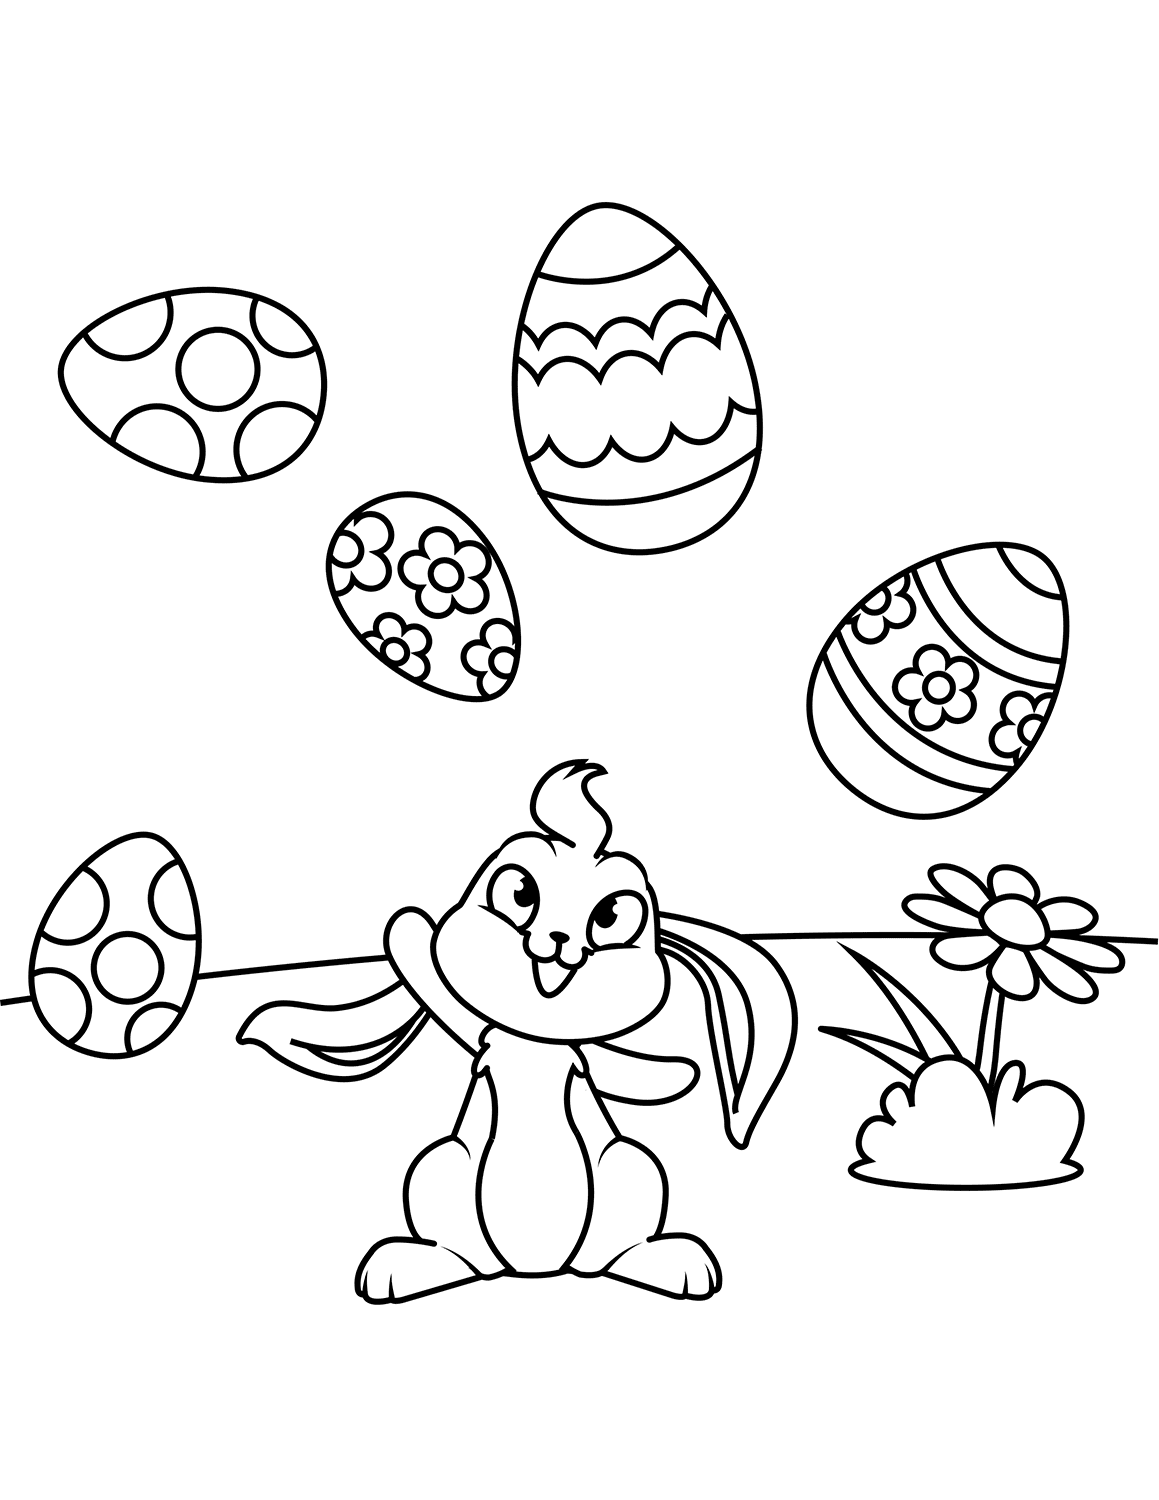 Cute Bunny Juggling Easter Eggs Coloring Page